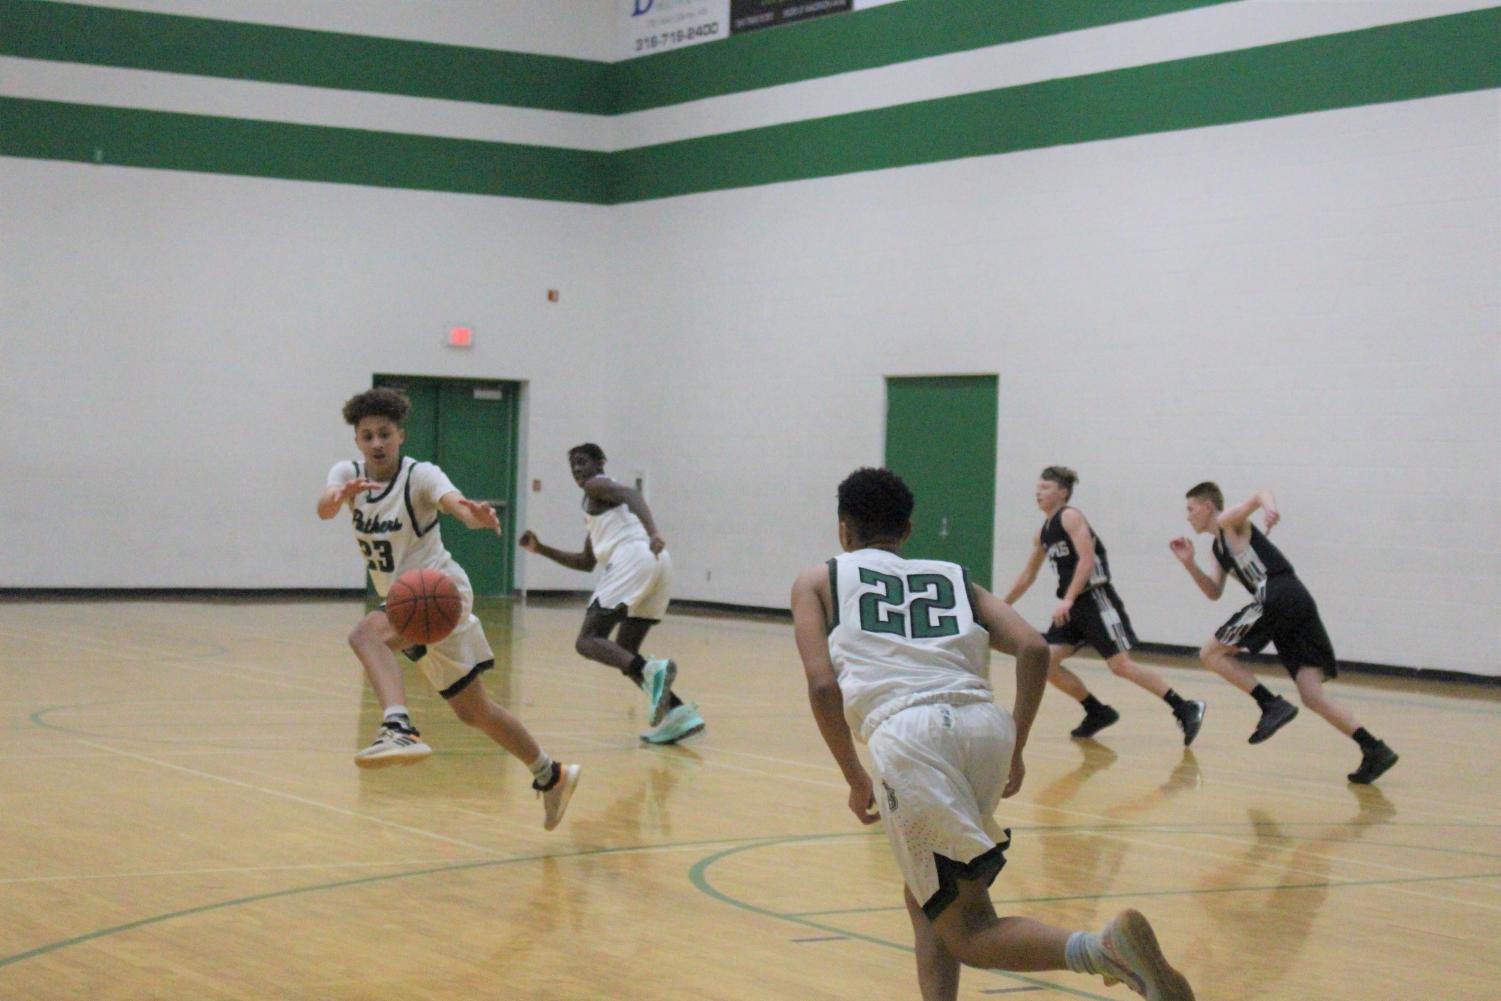 Derby+Vs.+Campus+Basketball+%28Photos+by+Janeah+Berry%29